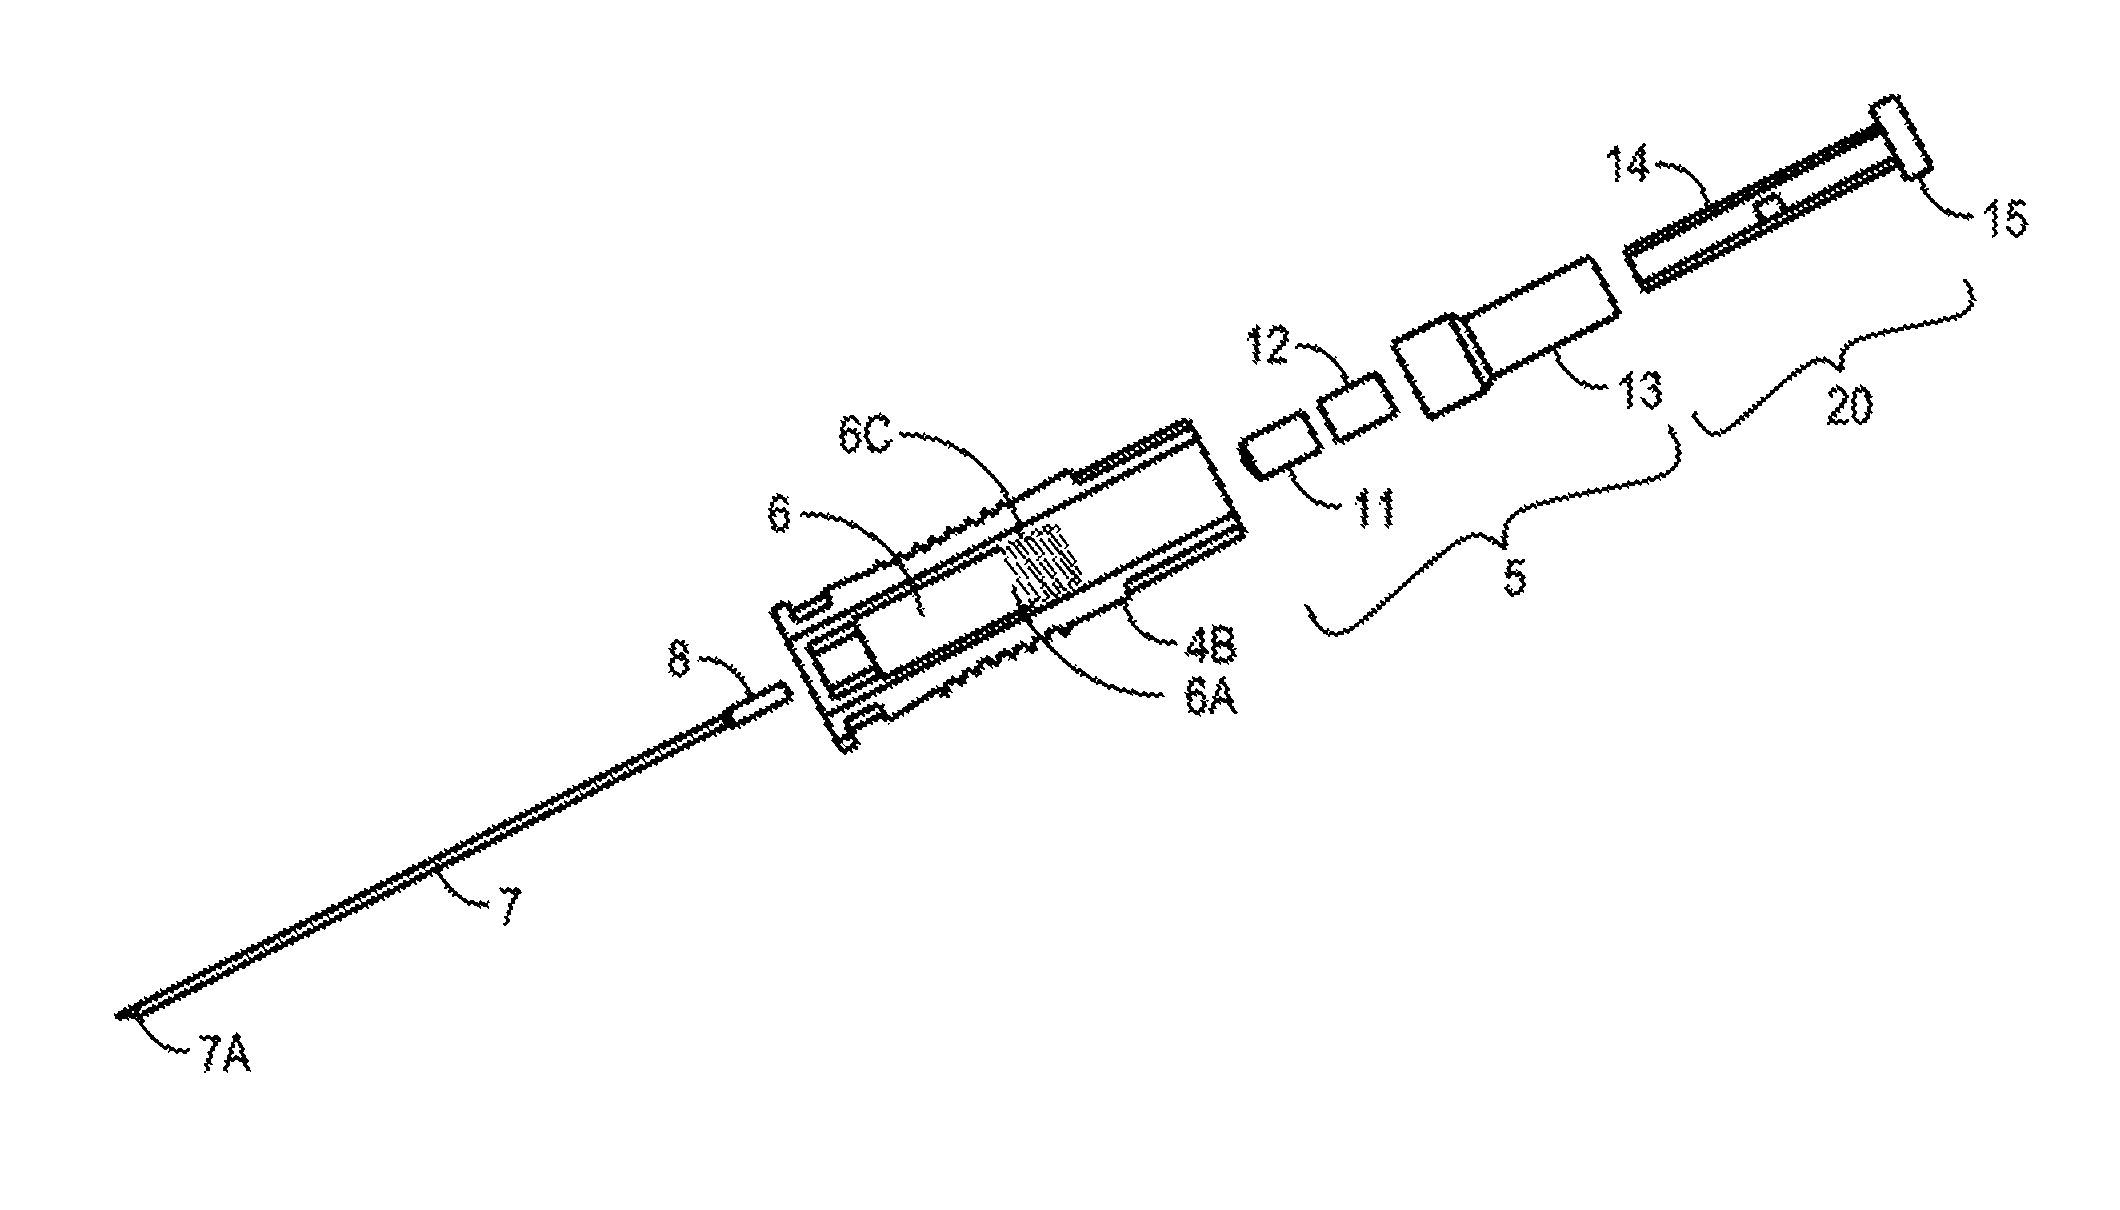 IV catheter insertion device and method